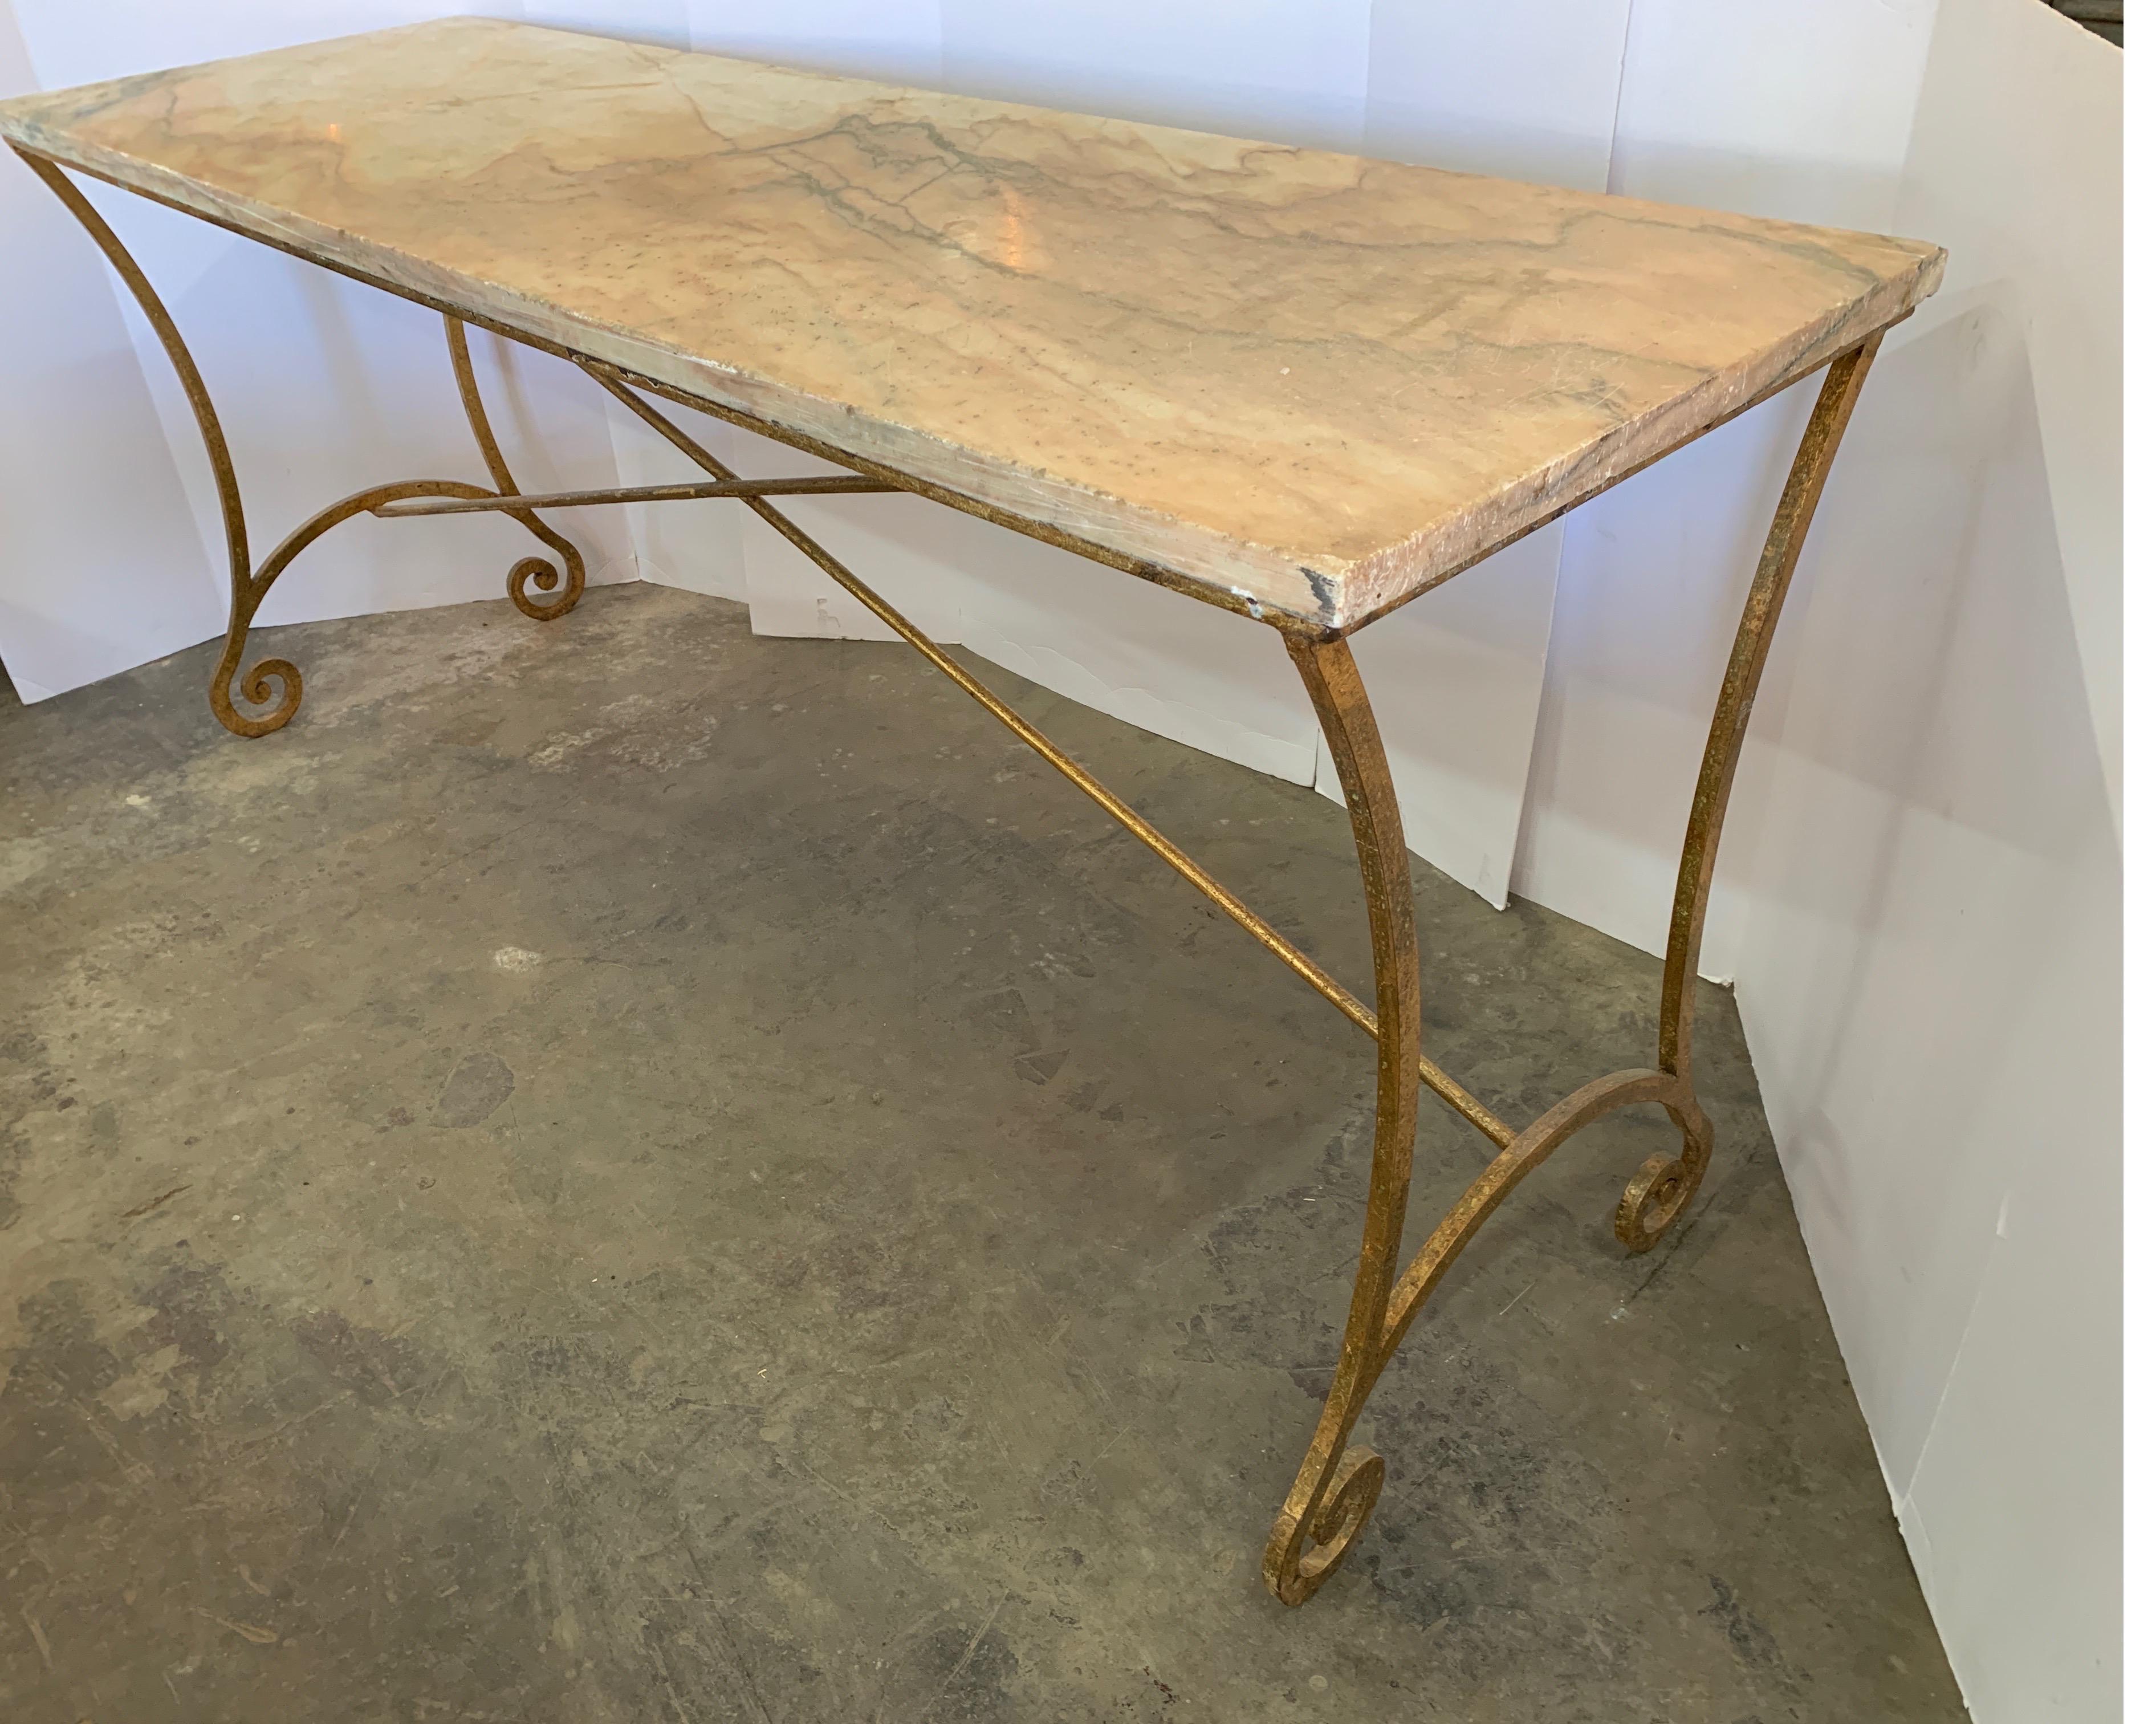 This is a great console for either outdoor patio or inside your home. The gold iron gives it a dressy finish and the antique marble adds to it's character. It originates from Spain.